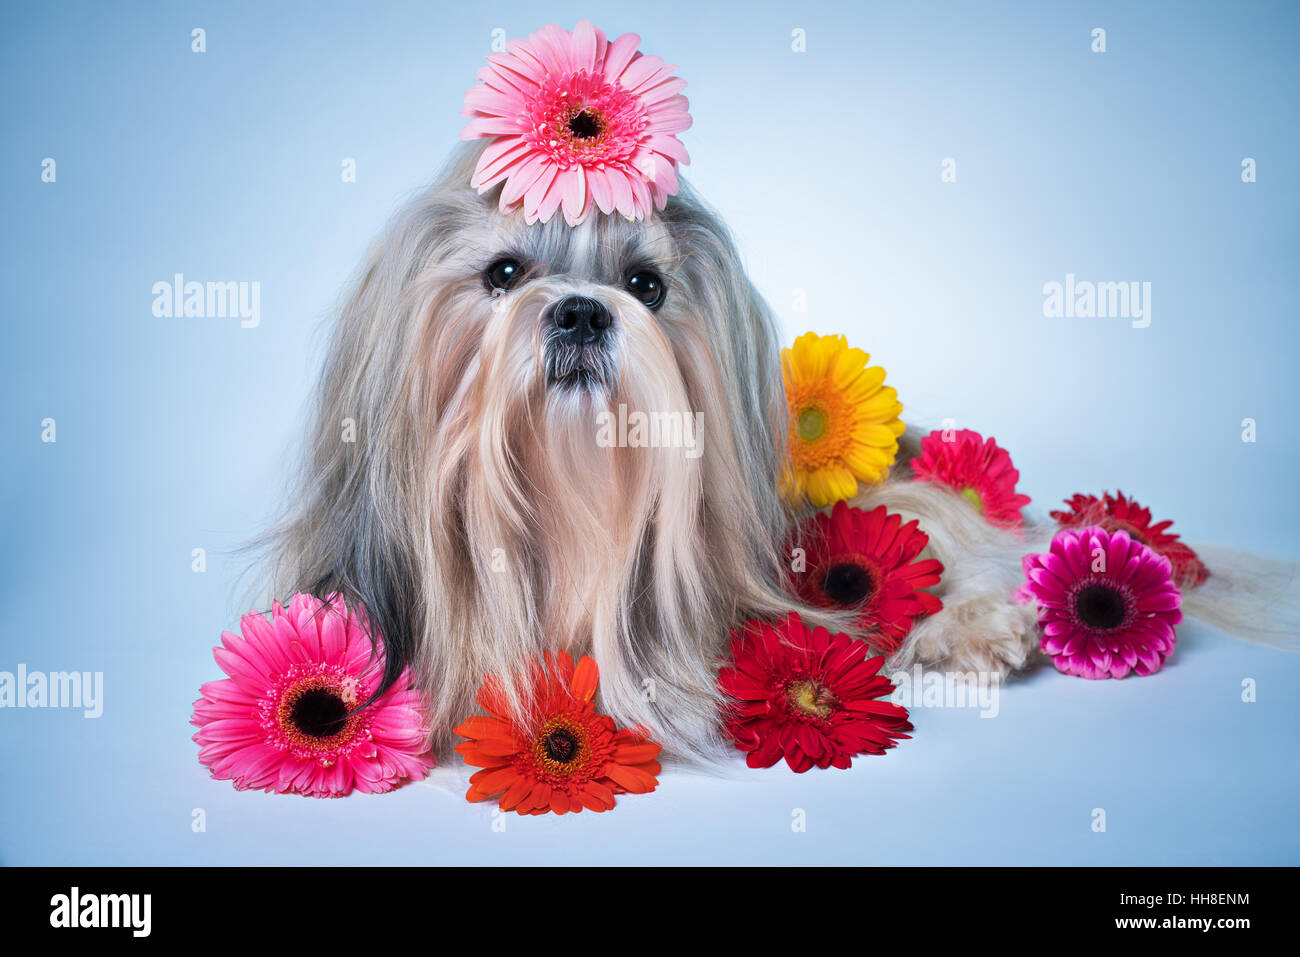 Shih tzu dog lying with flowers. Relaxing and good fragrance concept. Stock Photo